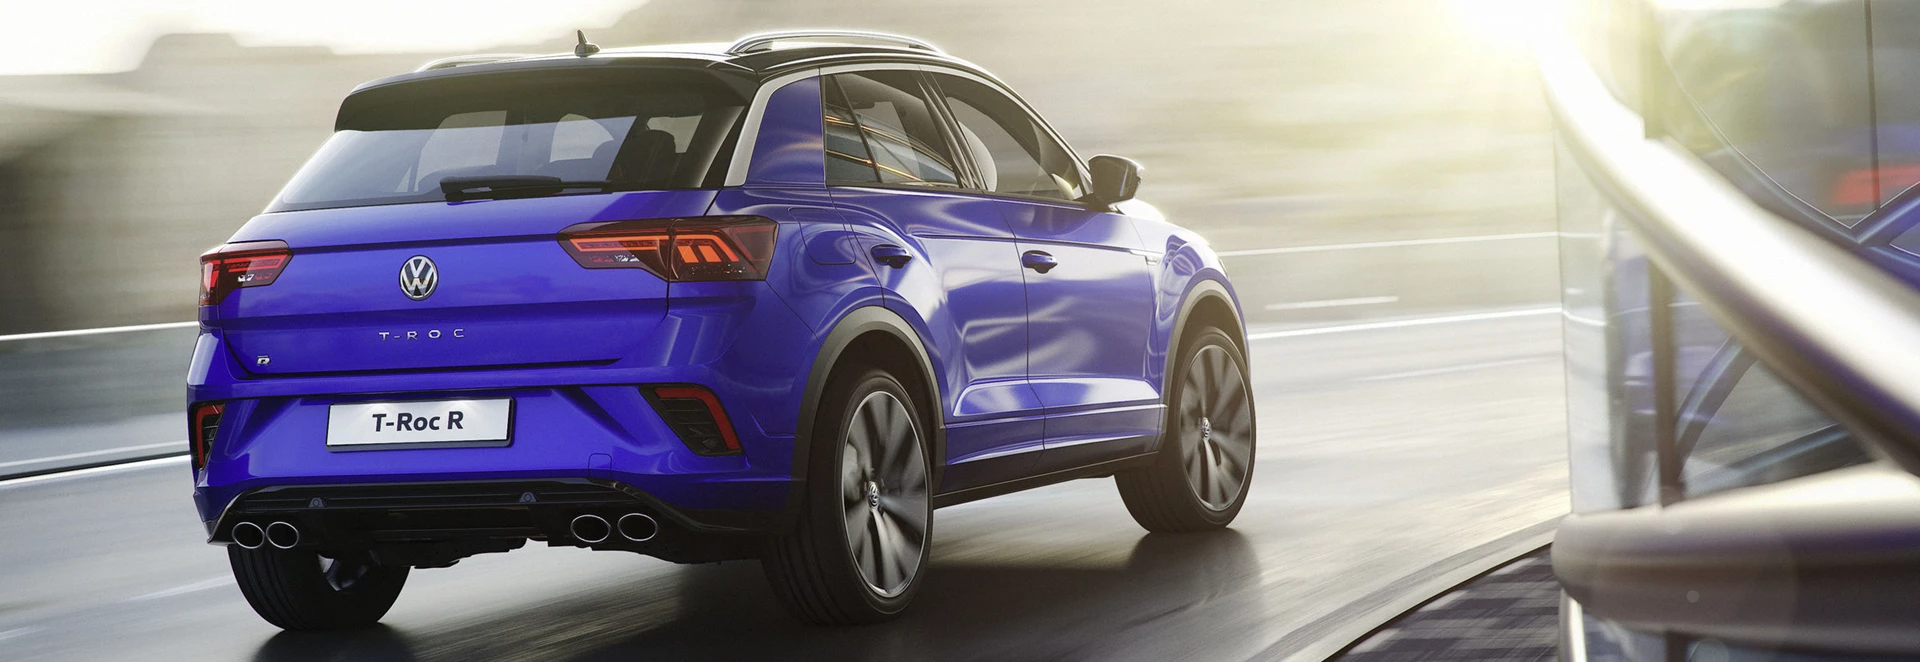 Prices announced for powerful Volkswagen T-Roc R